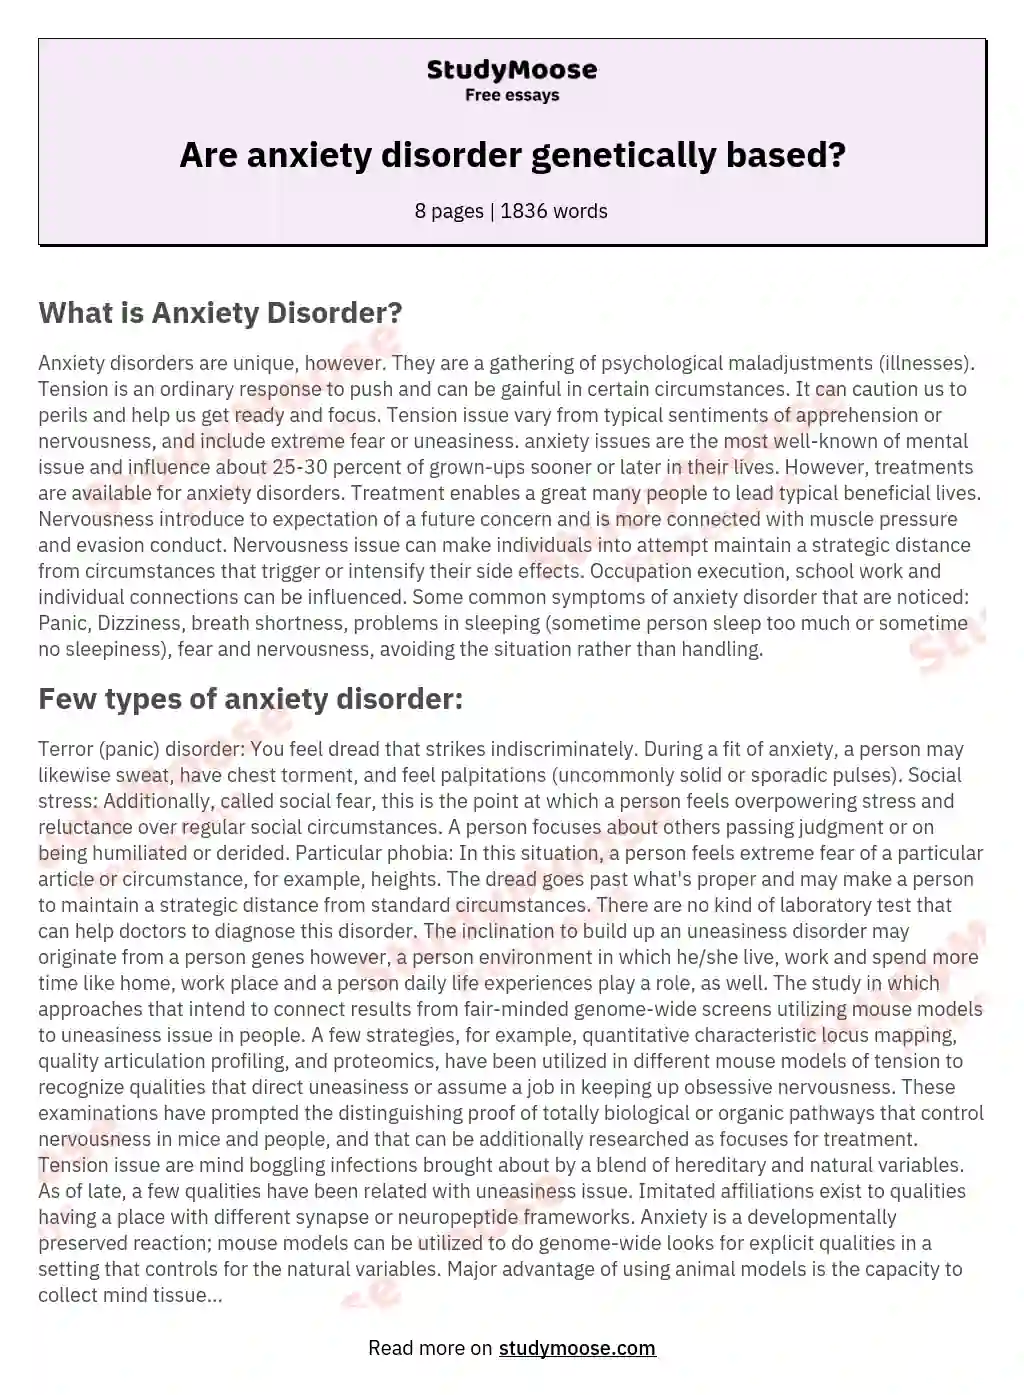 Are anxiety disorder genetically based? essay